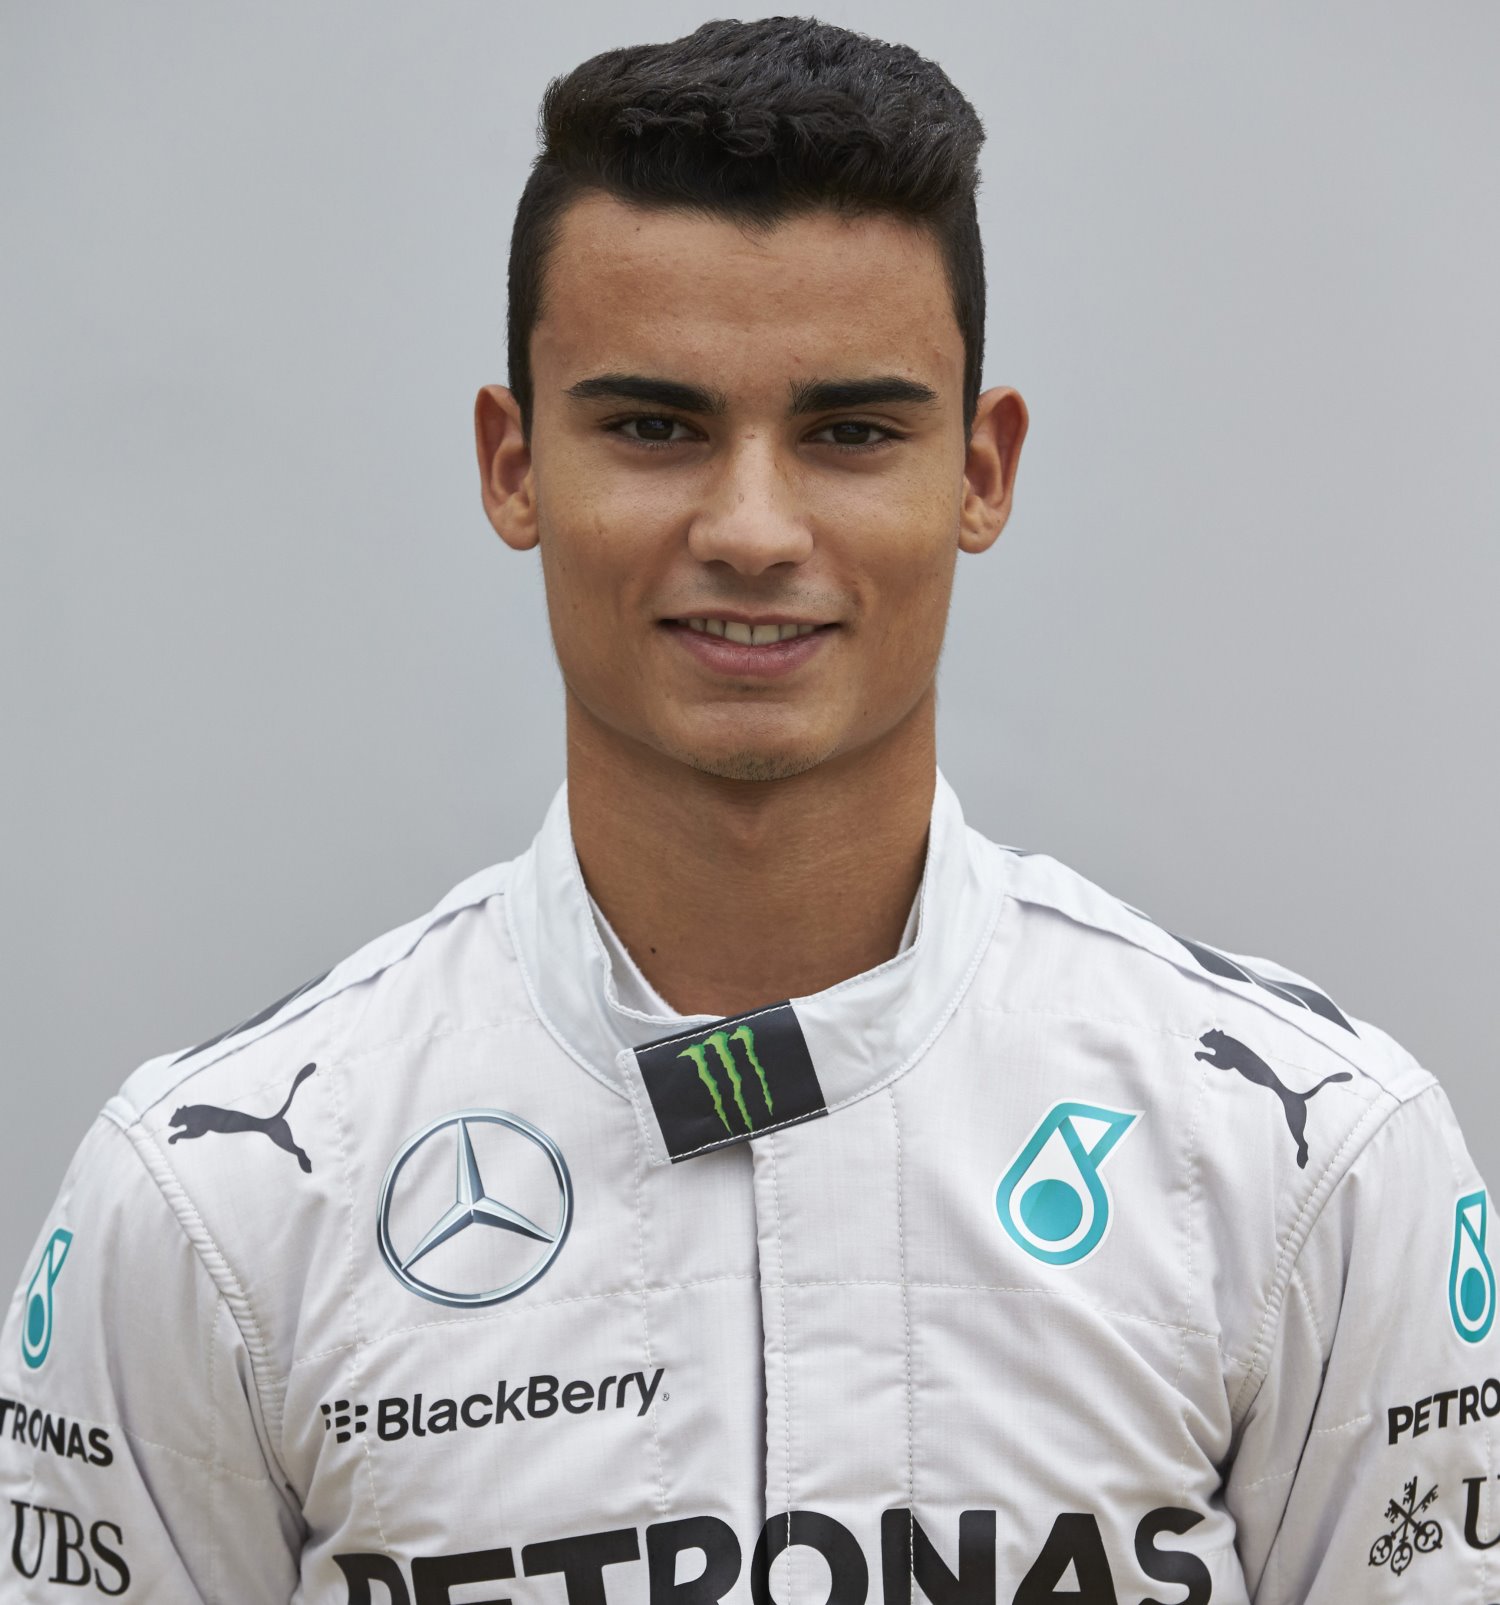 Pascal Wehrlein will be #94